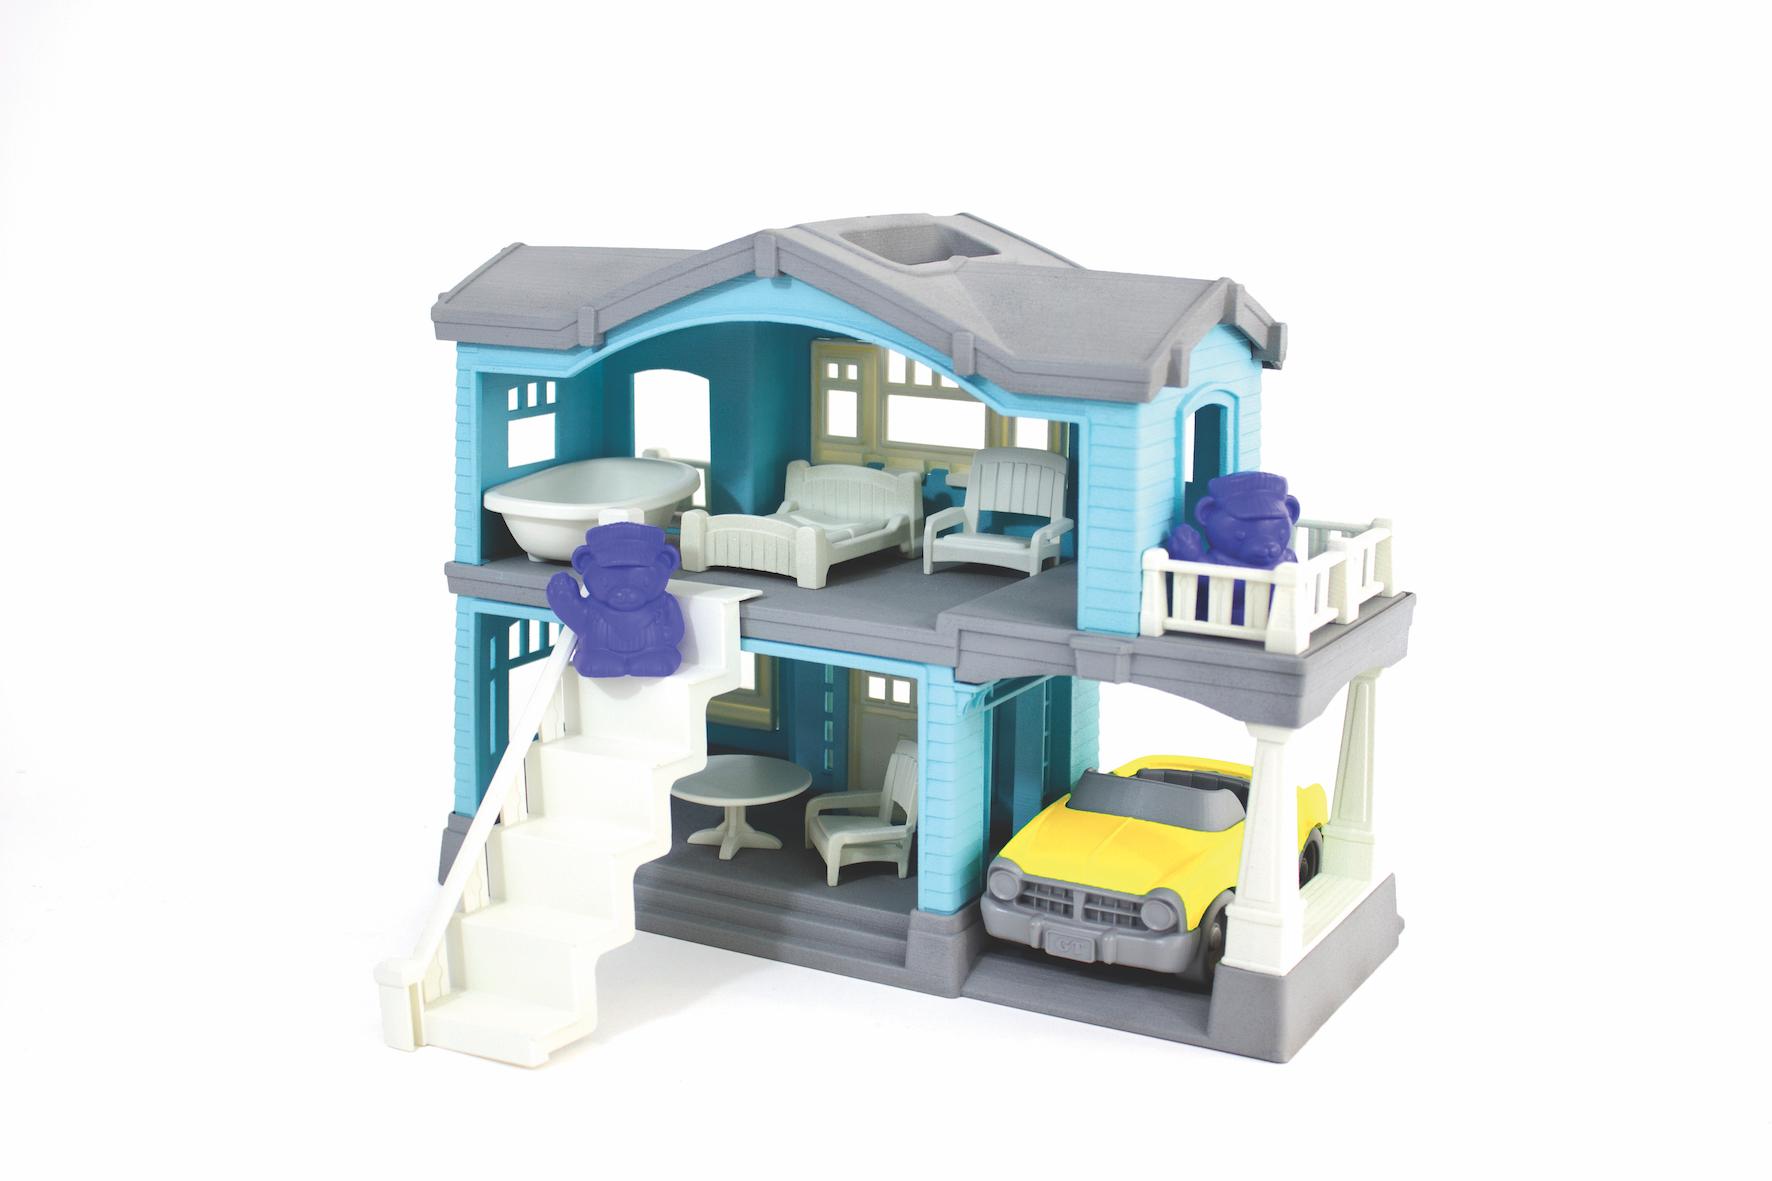 Blue recycled plastic house play-set with car-port and yellow car.